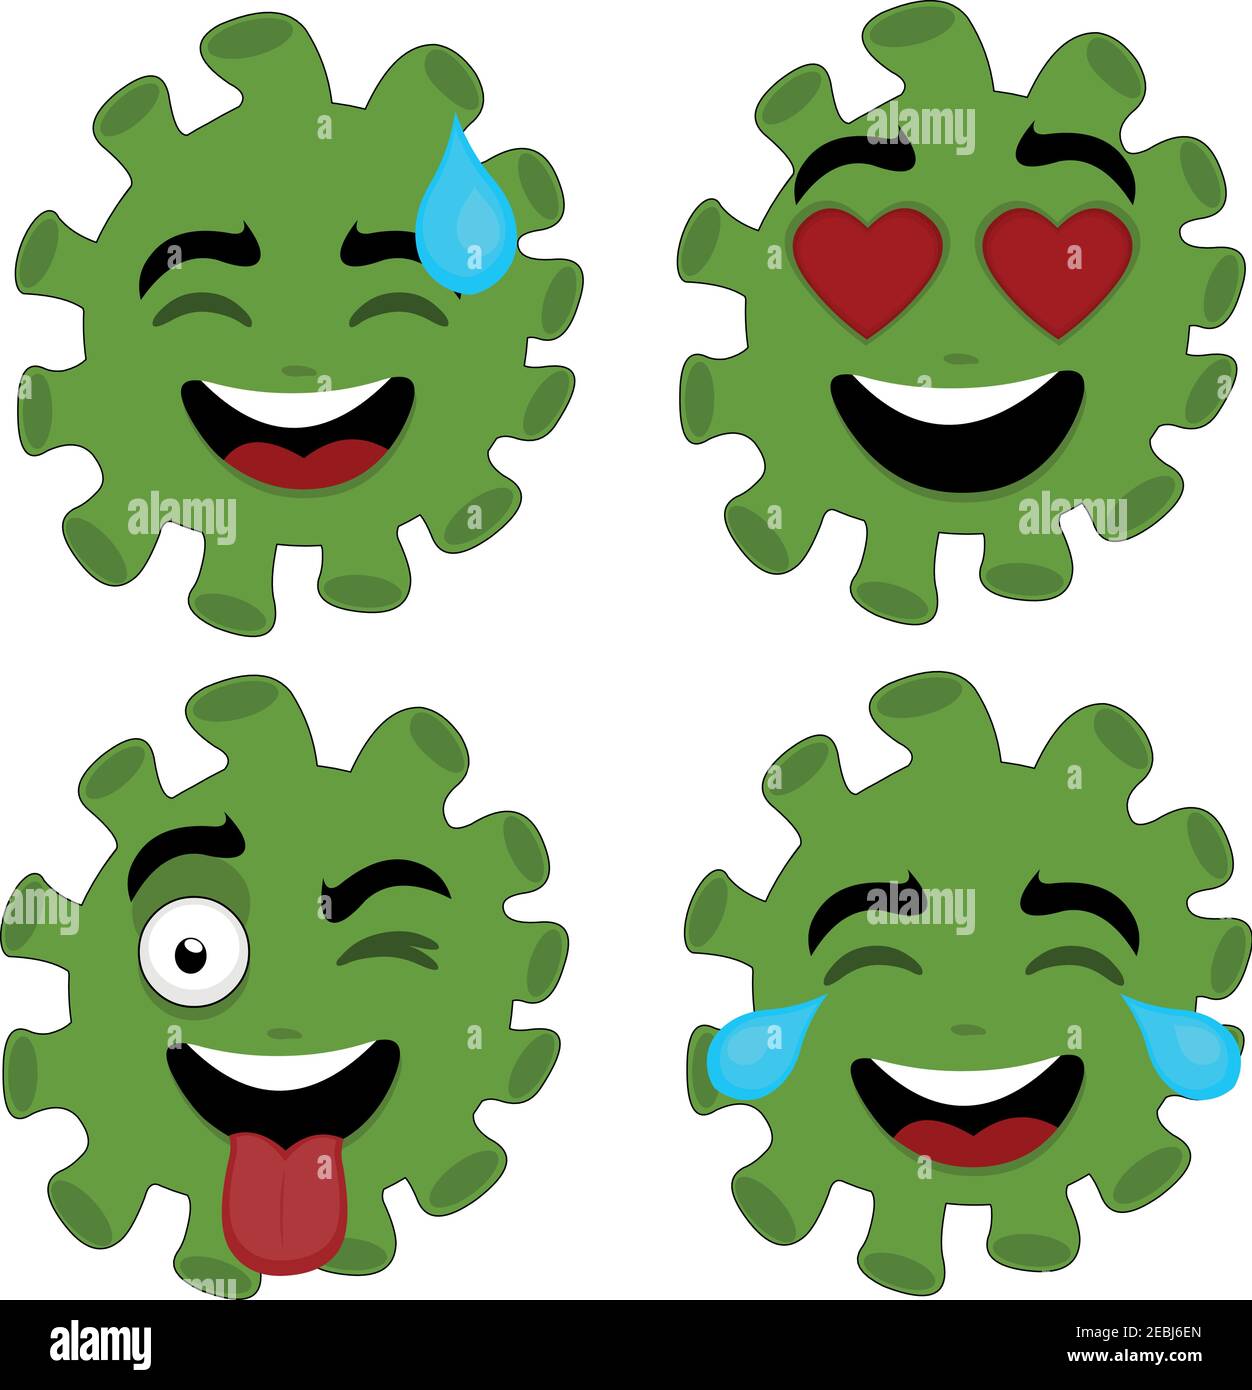 Vector illustration of cartoon coronavirus character emoticons with different happy expressions Stock Vector